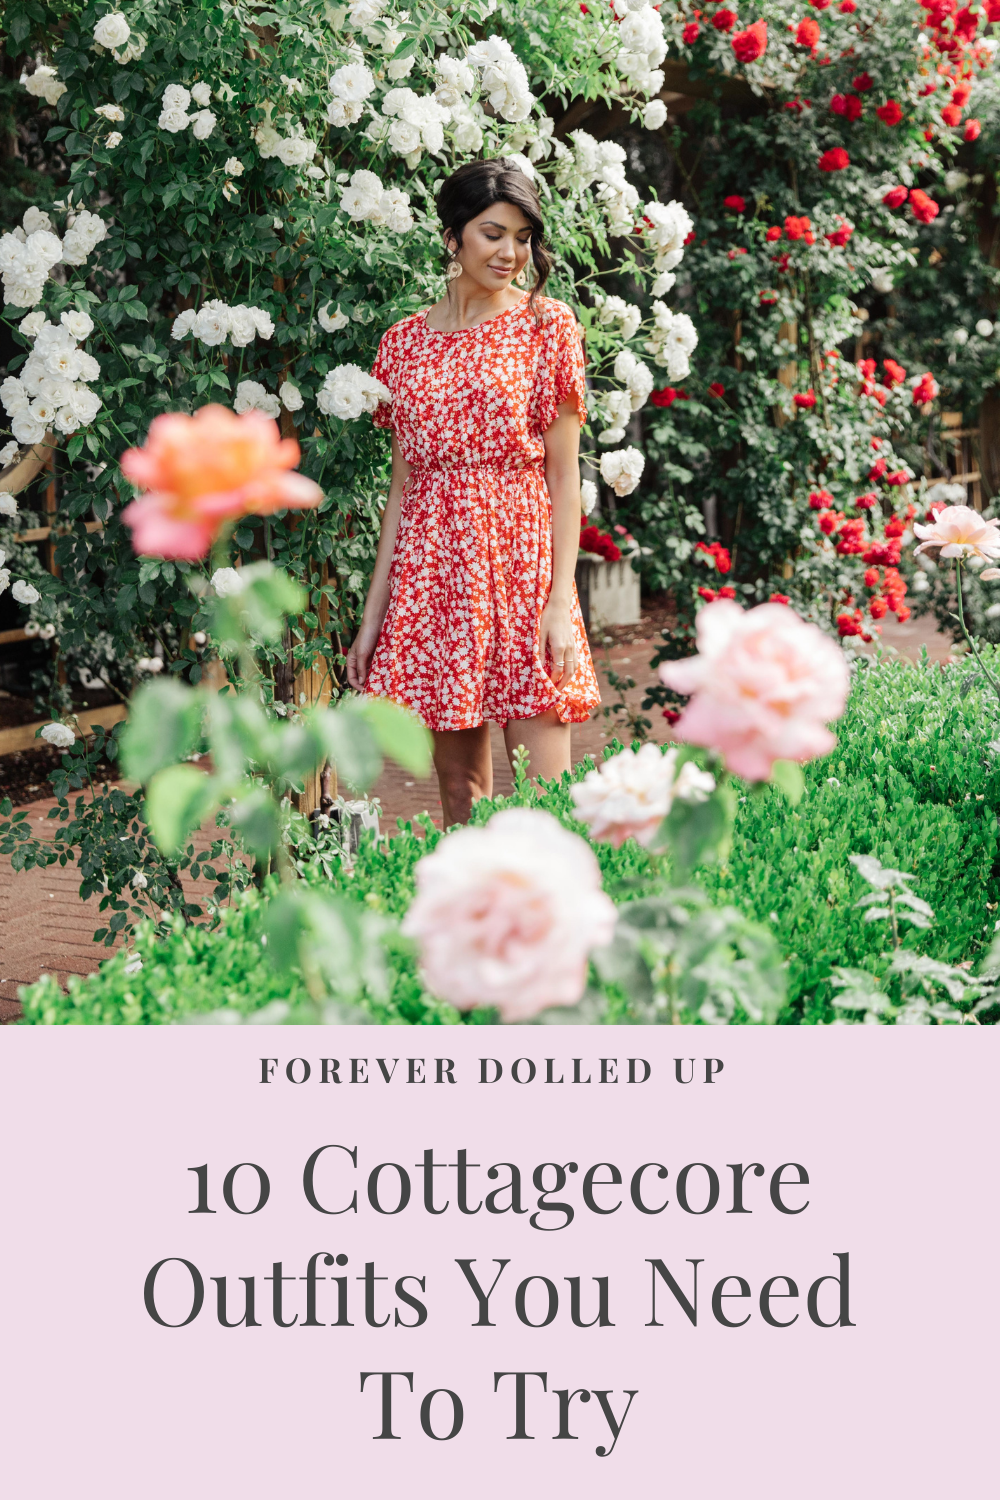 10 Cottagecore Outfits You Need To Try